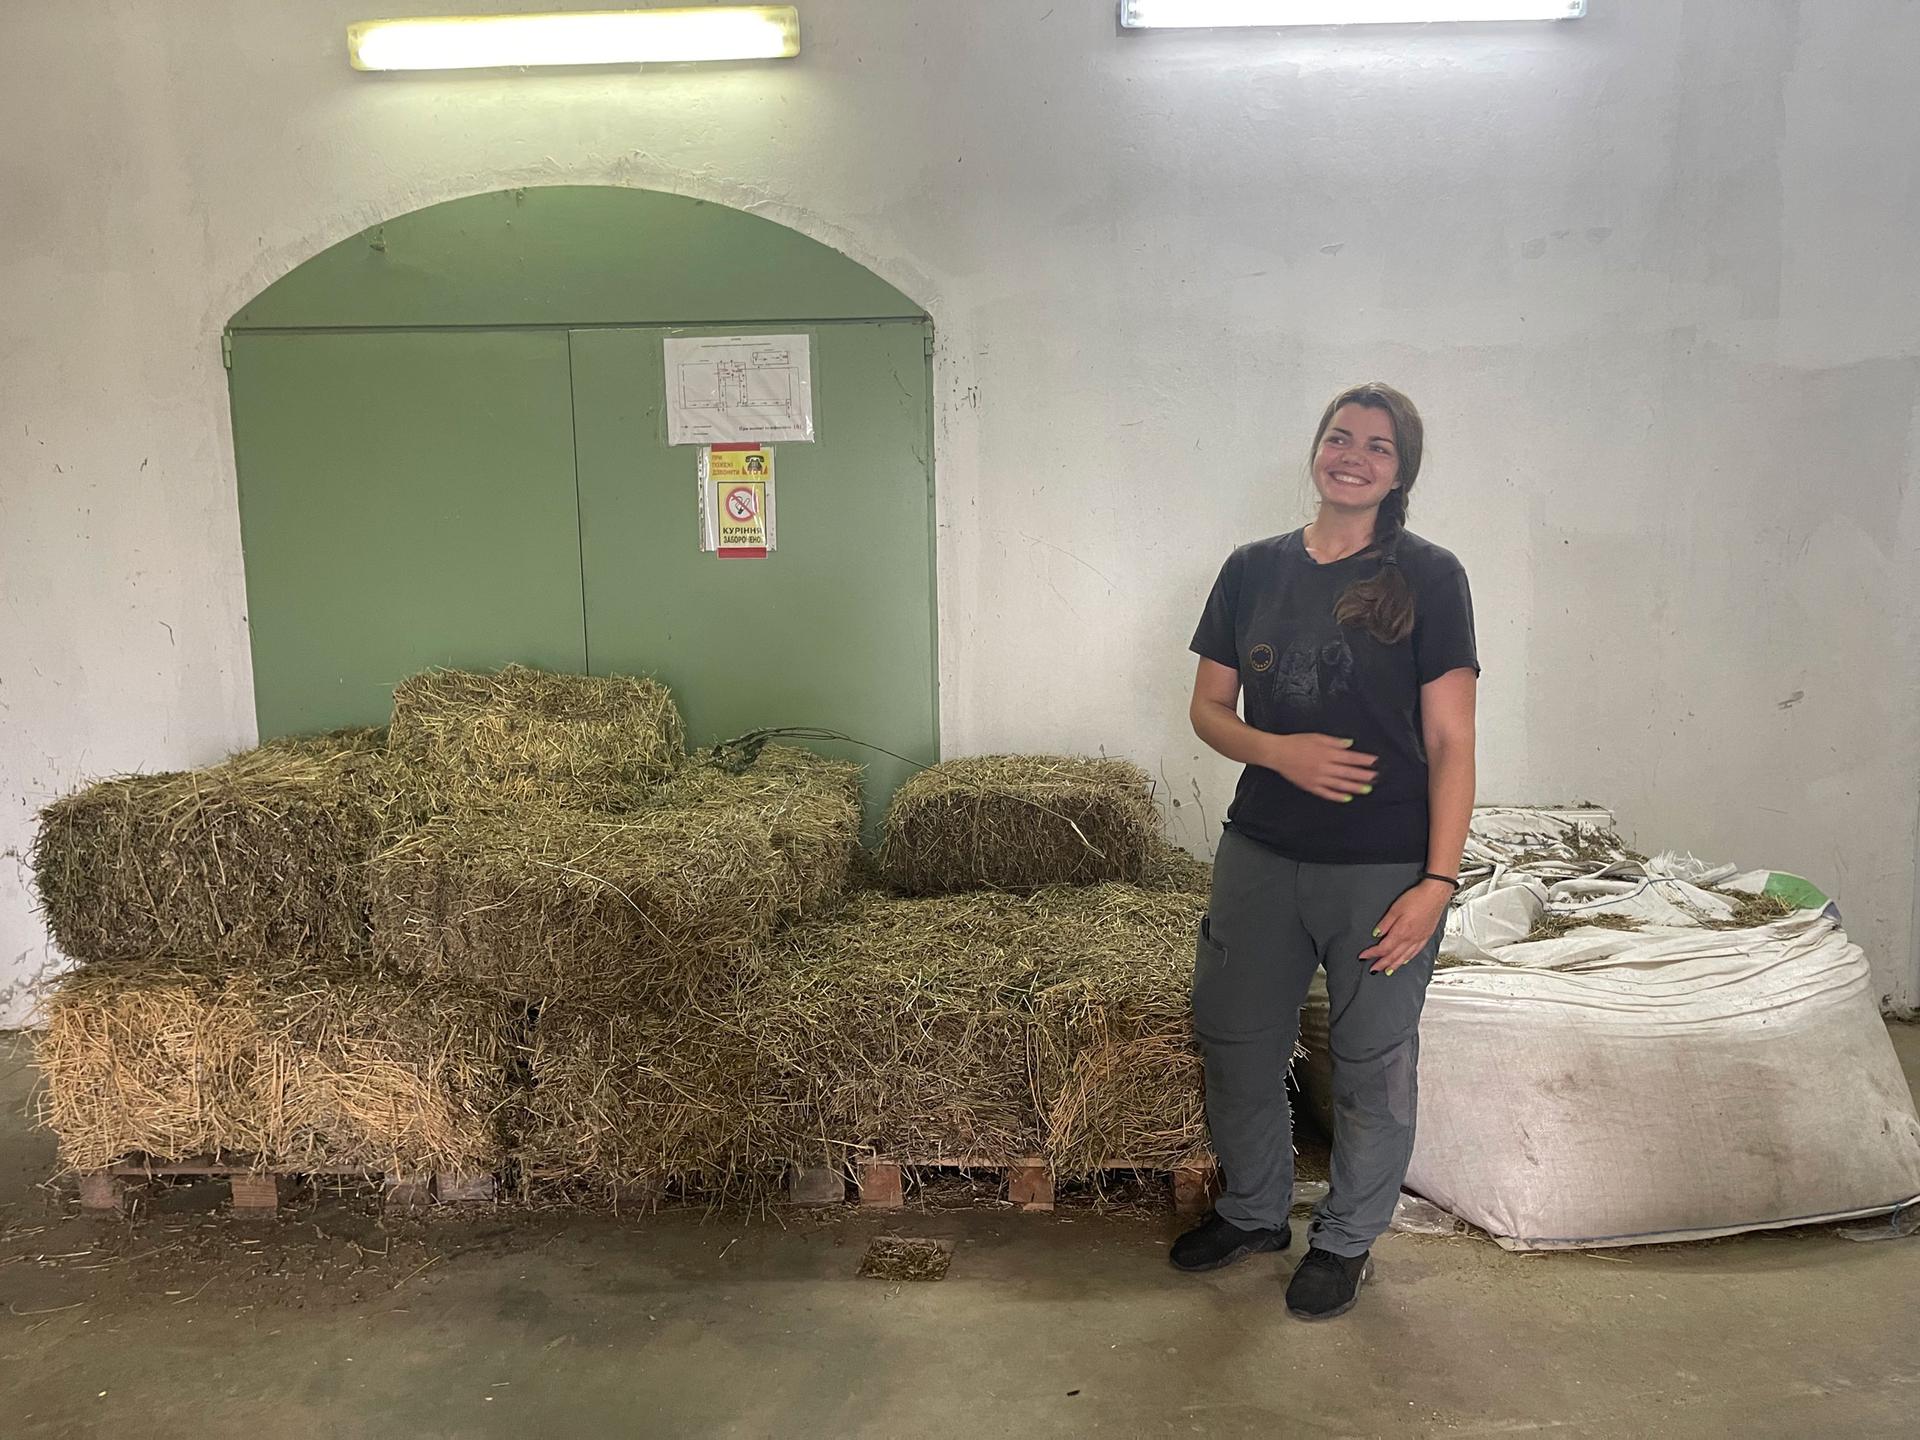 Zoo XII Months veterinarian Alina Malynka poses in front of the bails of hay where she slept when Russians occupied the zoo for over a month at the end of February. She was one of the six zoo staff members trapped inside for over 35 days.